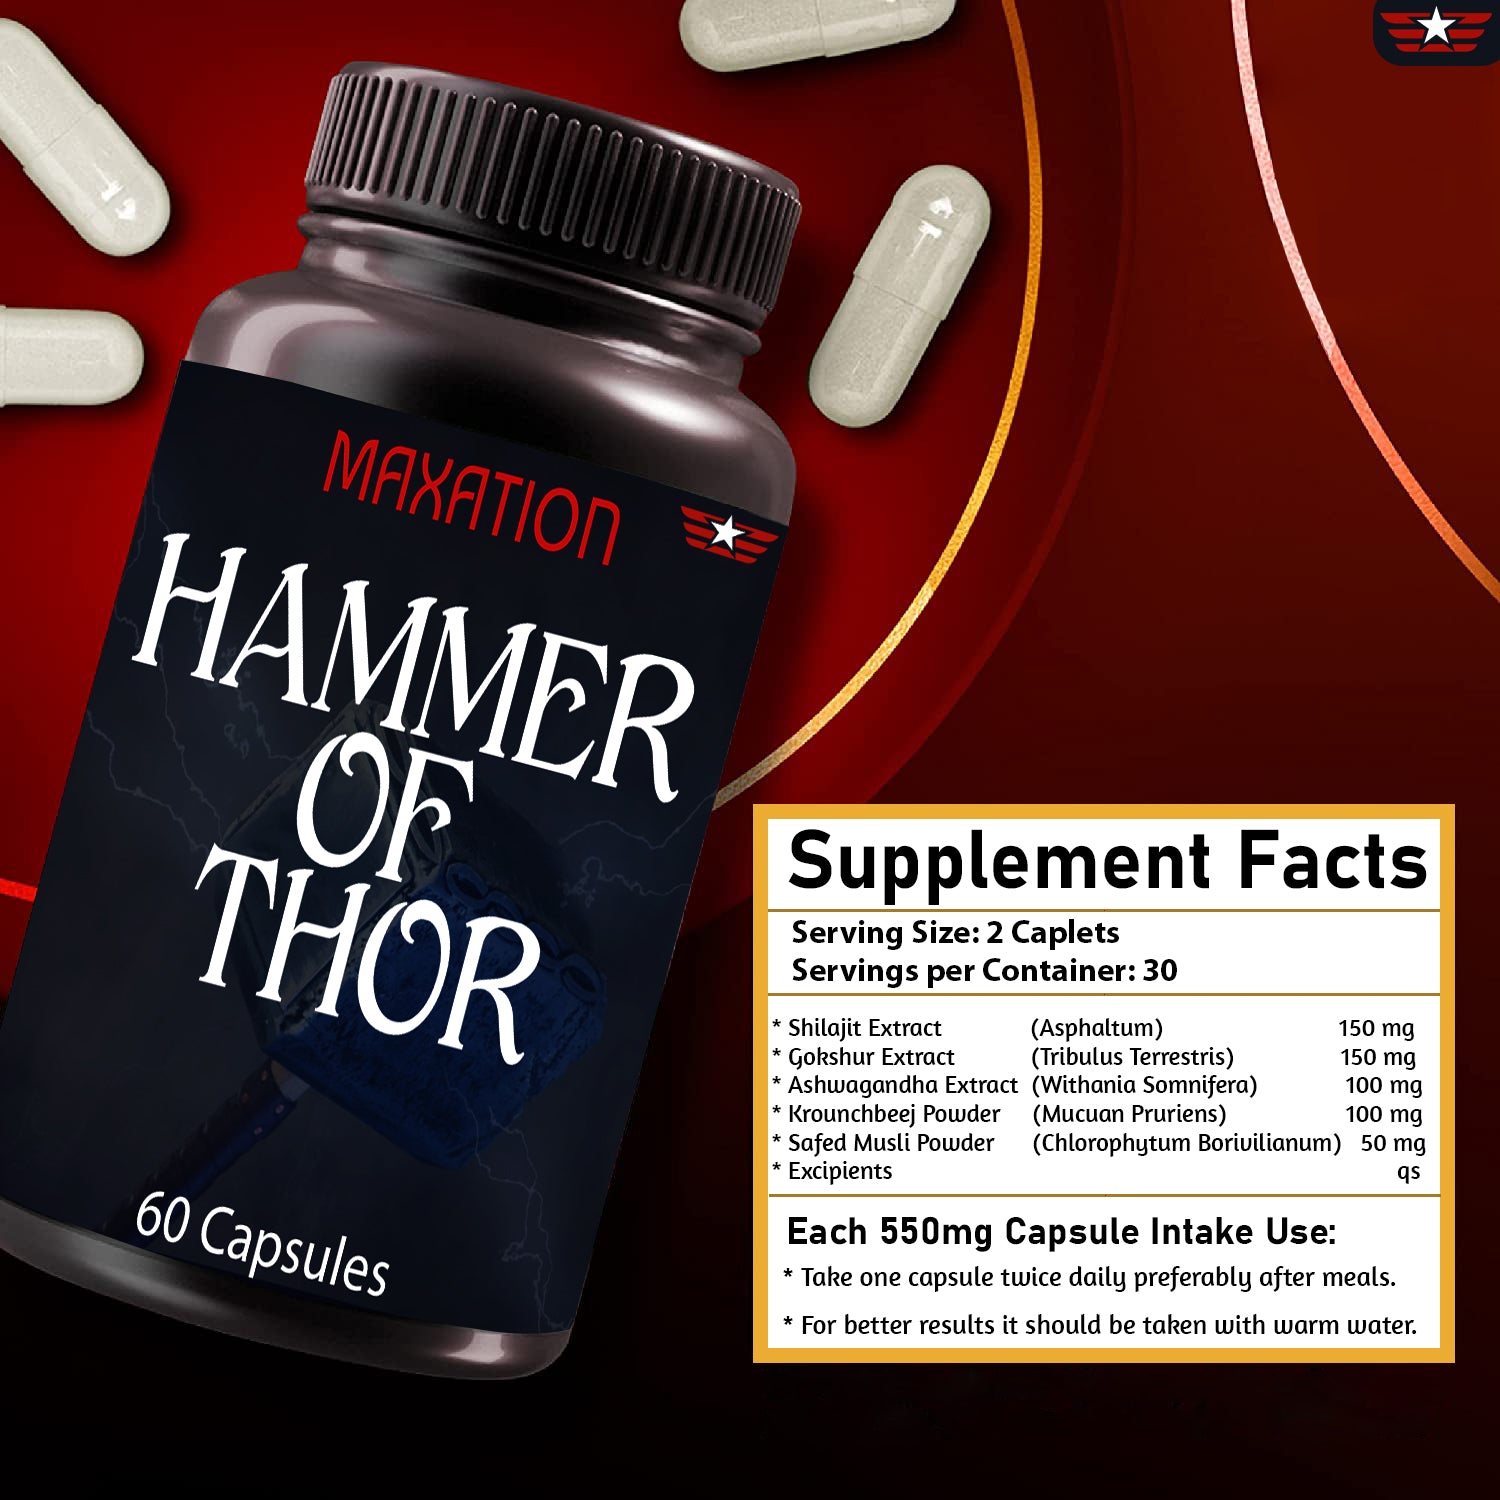 Maxation Hammer of Thor - 60 Capsules